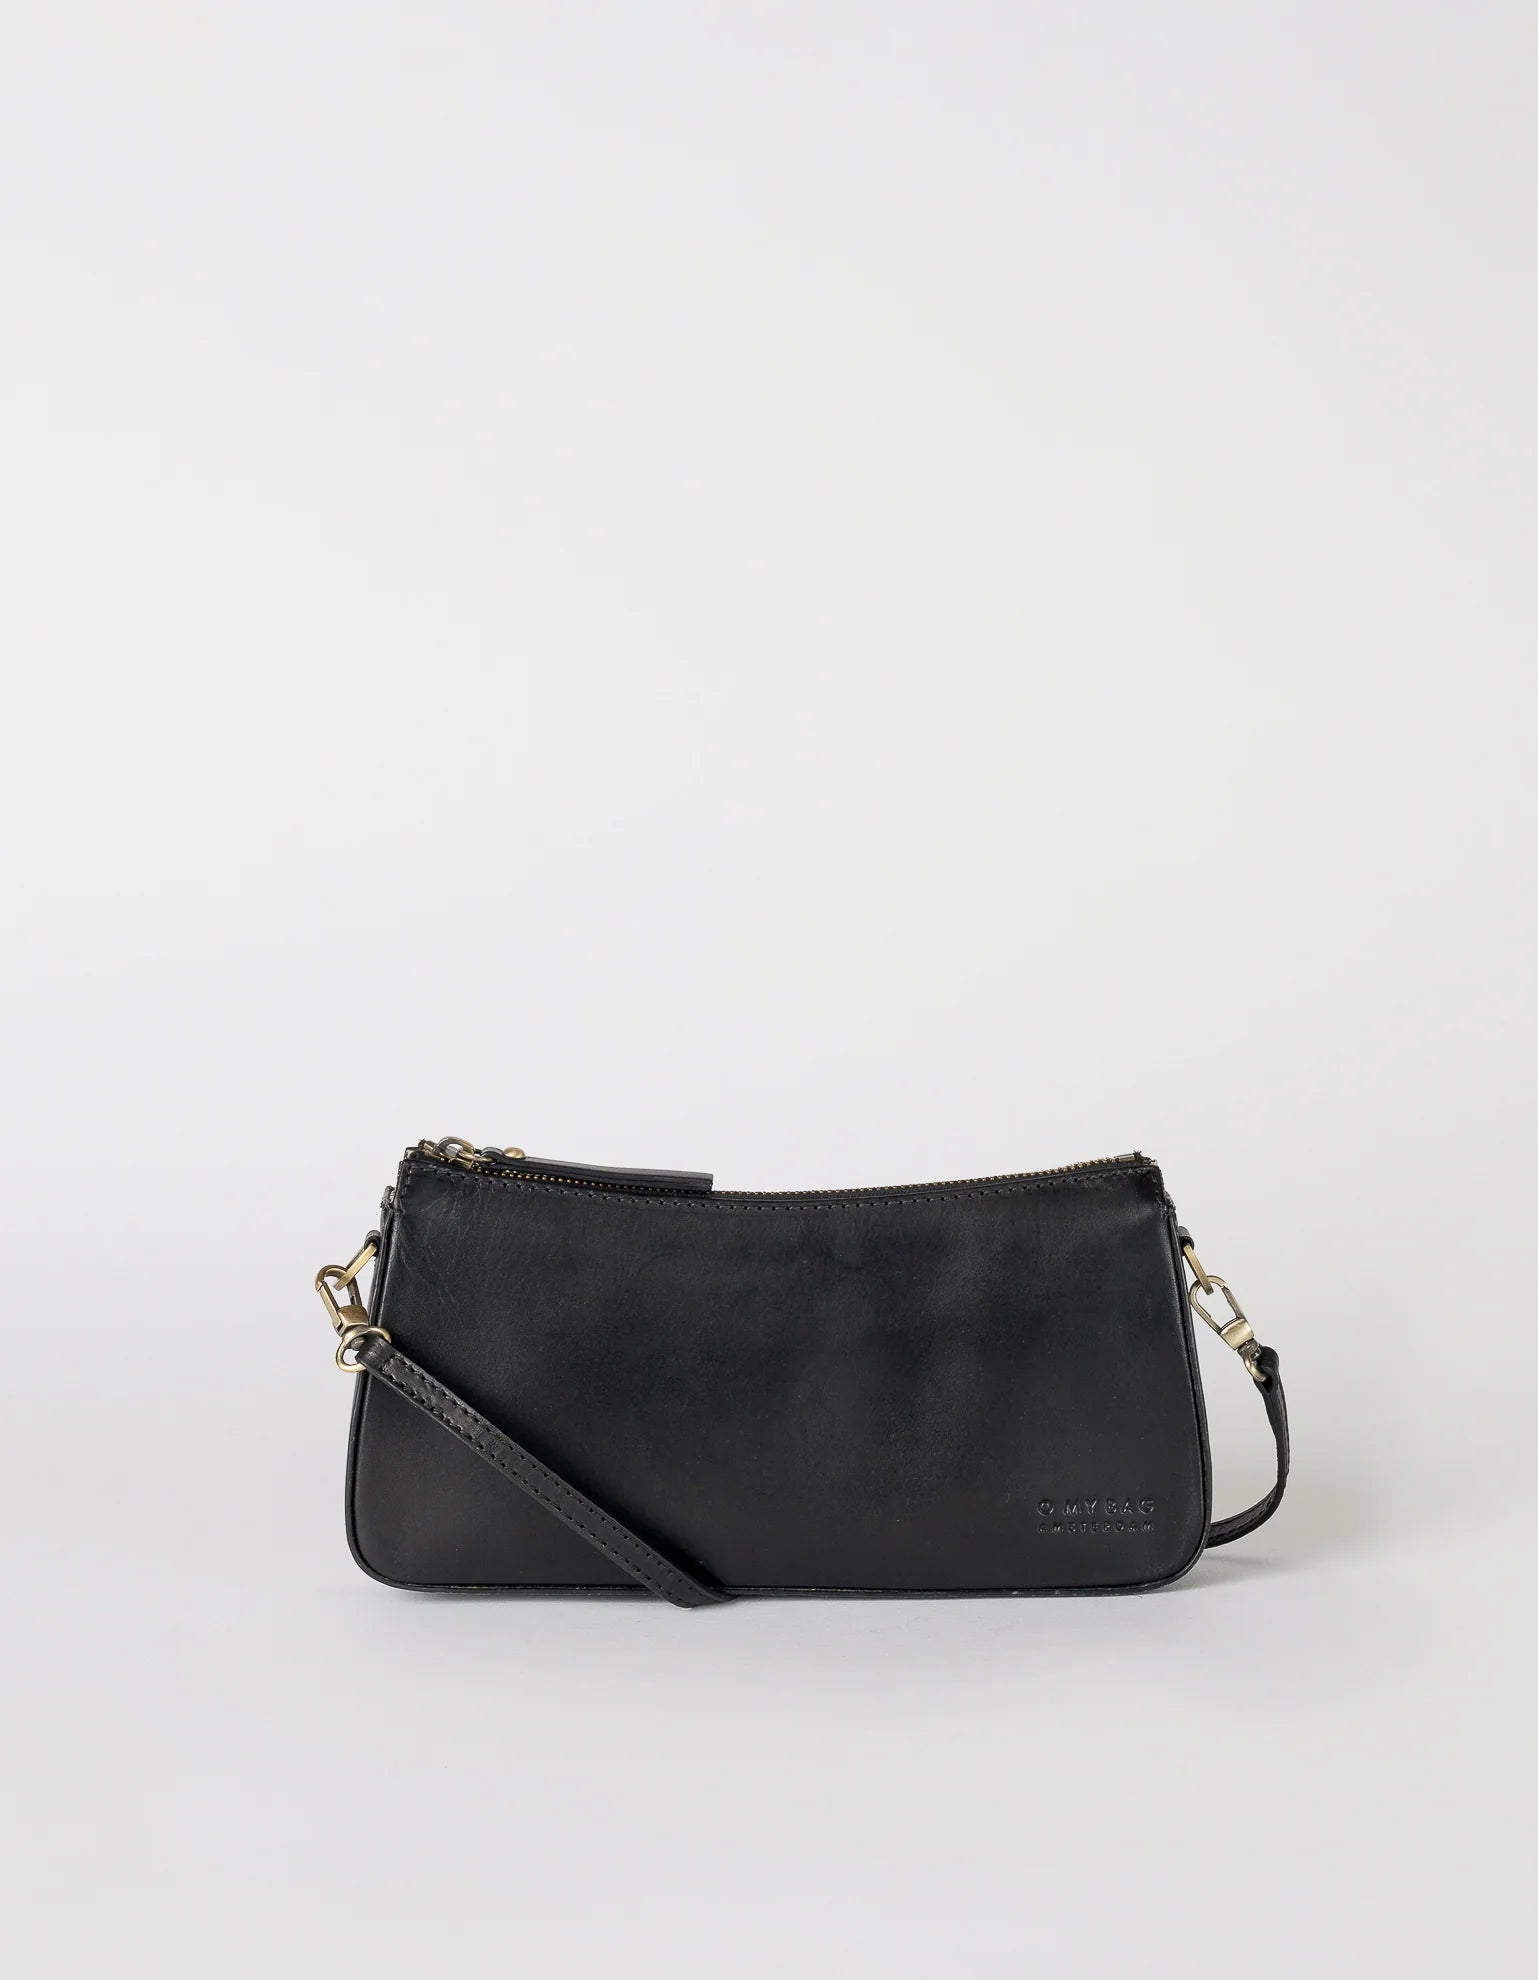 TAYLOR BAG - BLACK CLASSIC LEATHER